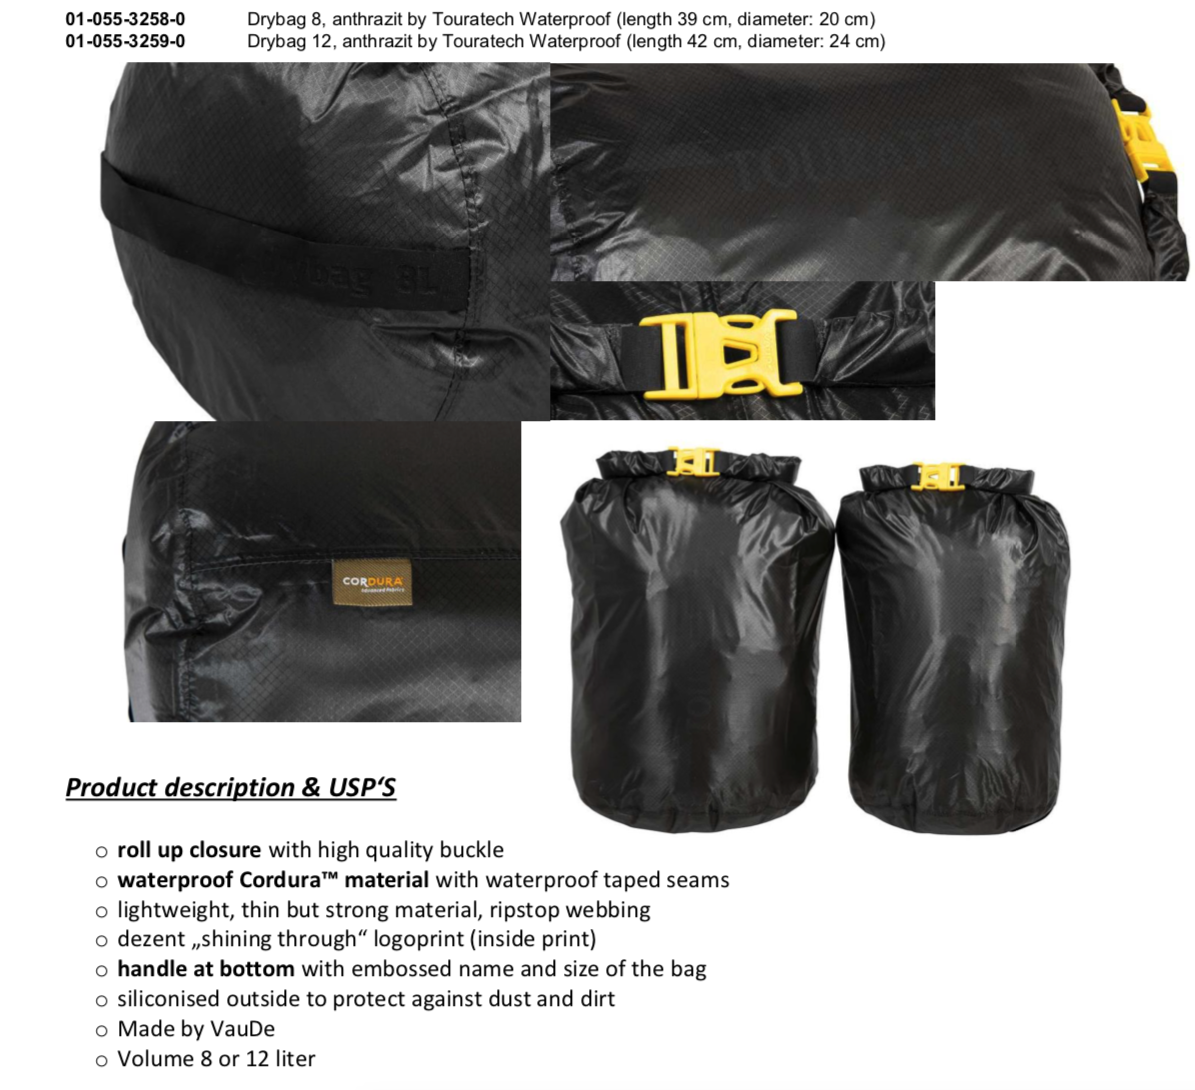 Drybag 8, anthrazit by Touratech WaterproofDrybag 8, anthrazit by Touratech Waterproof